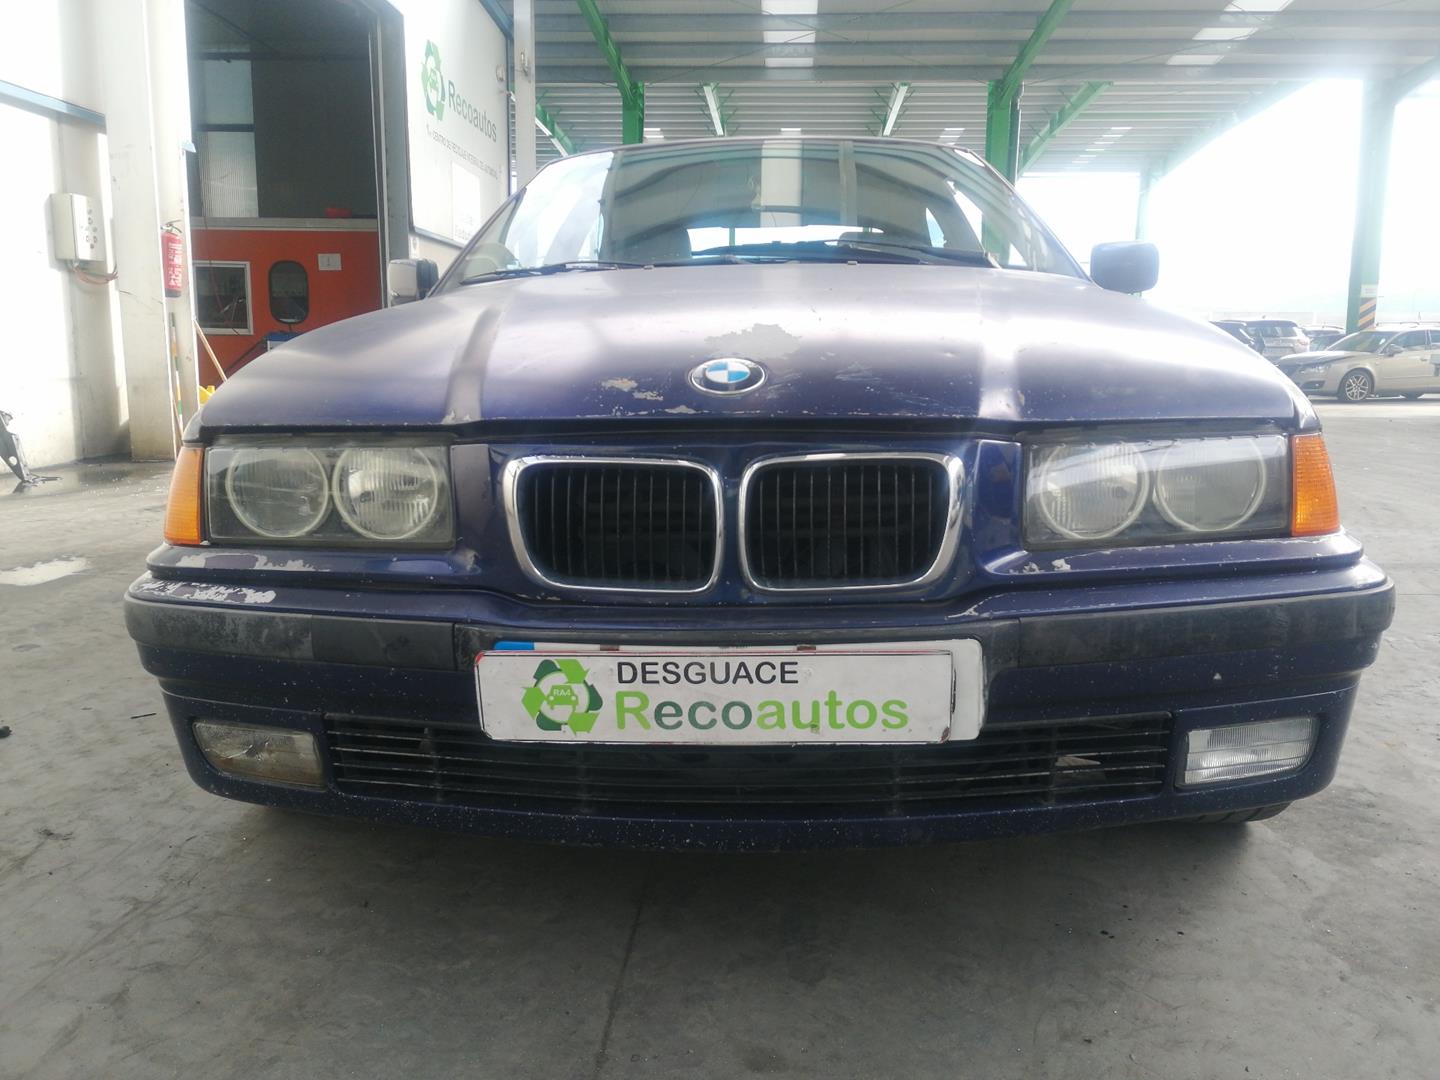 BMW 3 Series E36 (1990-2000) Other Control Units 61358387529 24199141